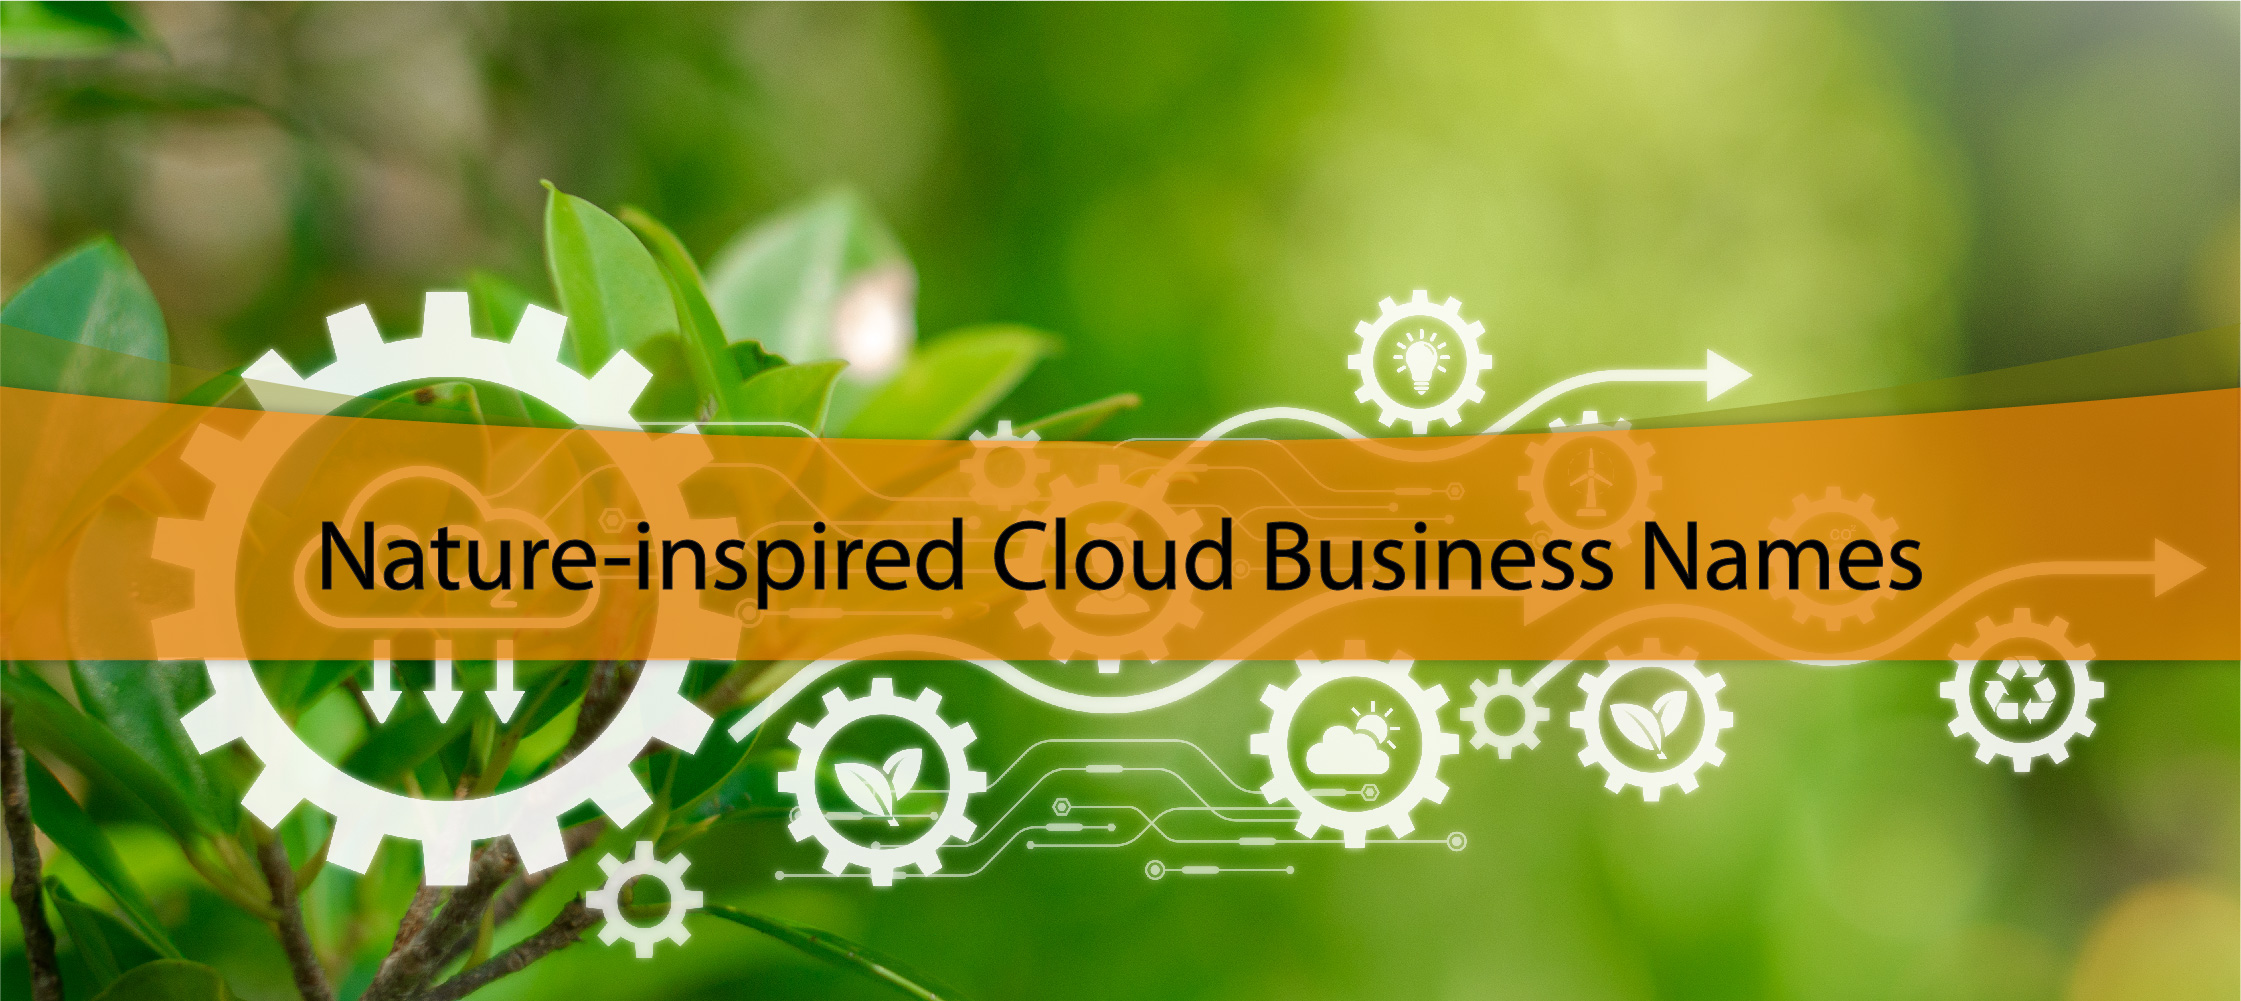 Nature-inspired Cloud Business Names